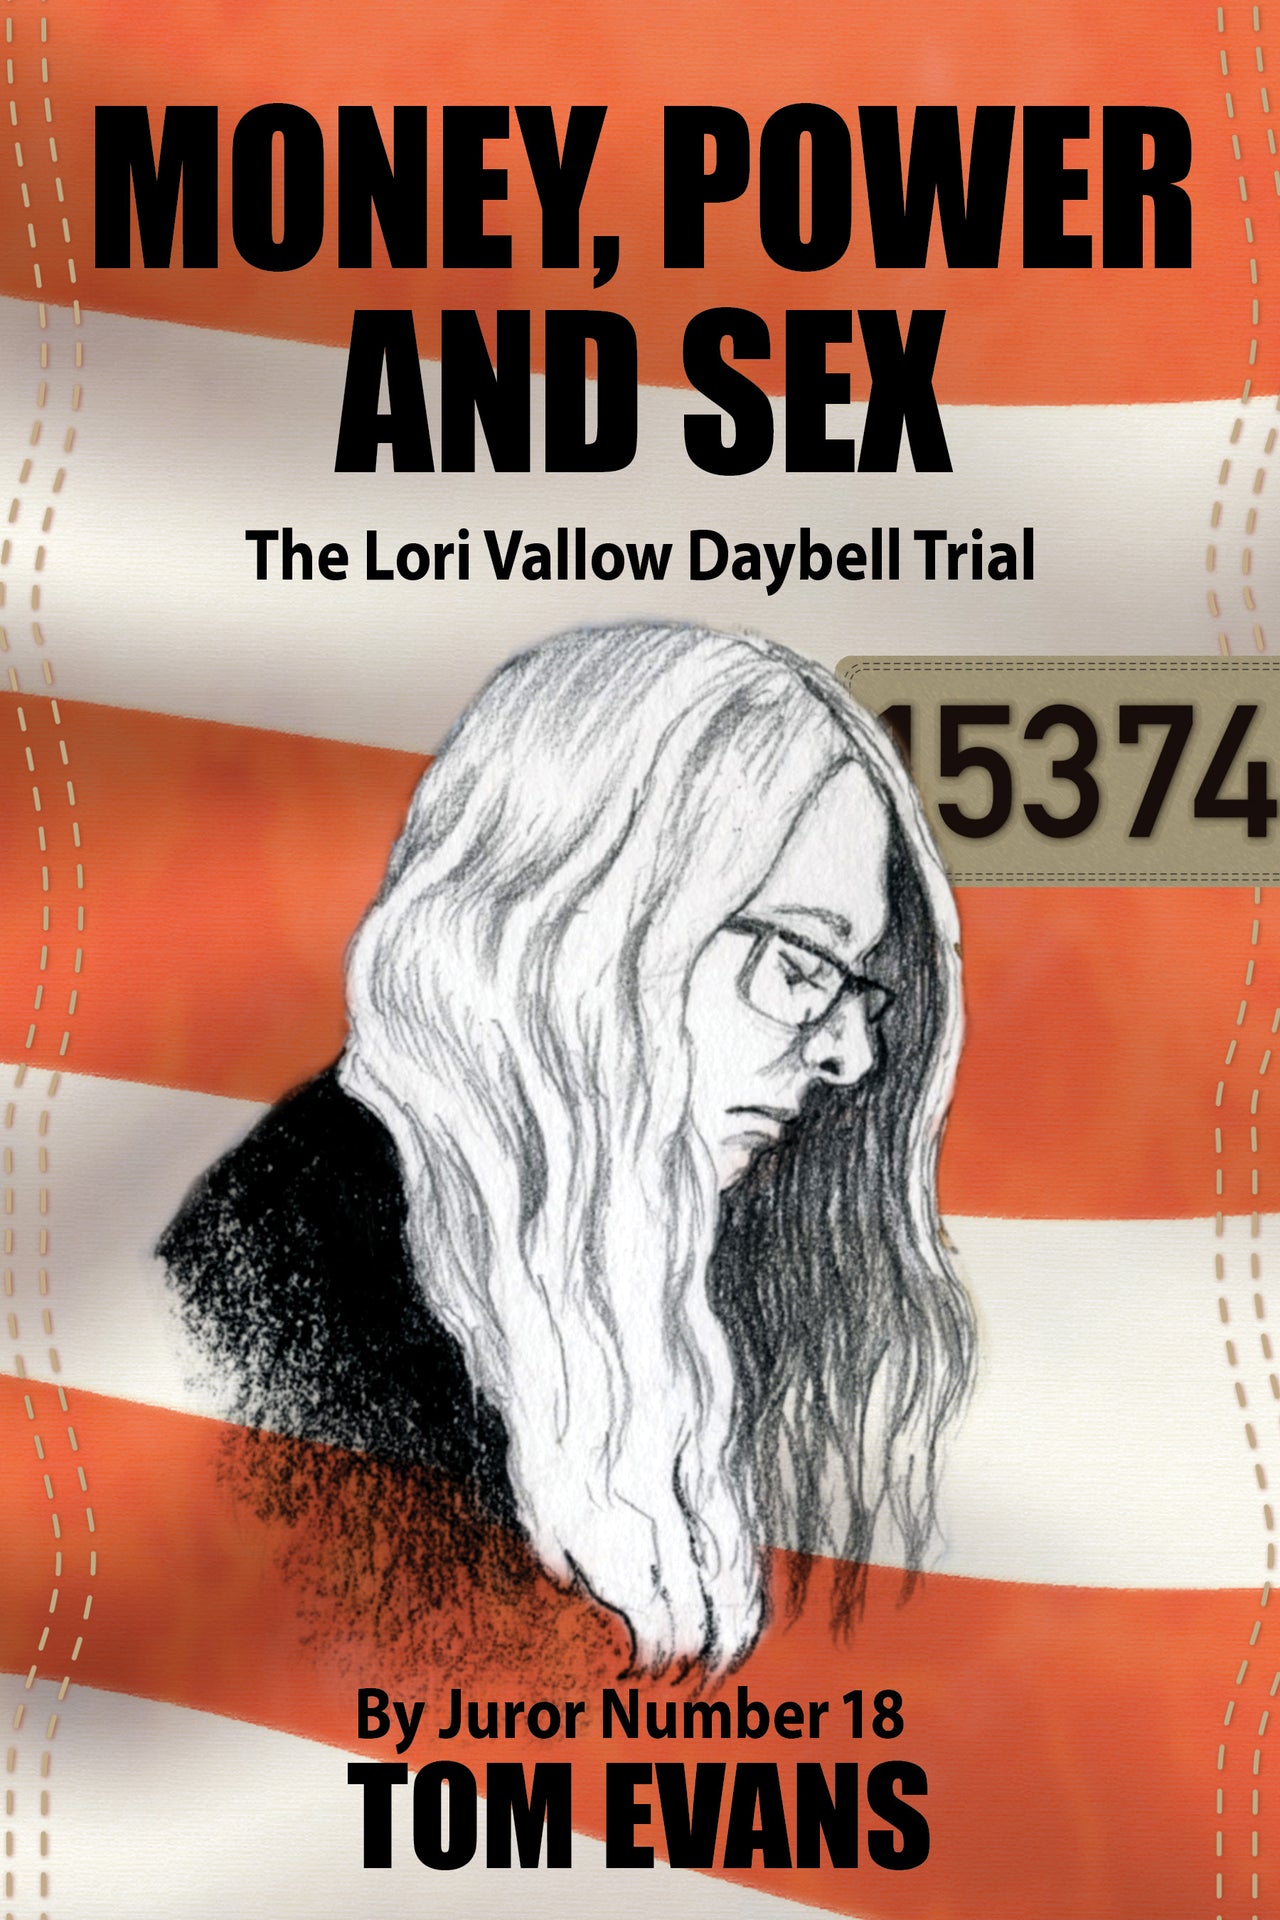 Money, Power, and Sex: The Lori Daybell Trial